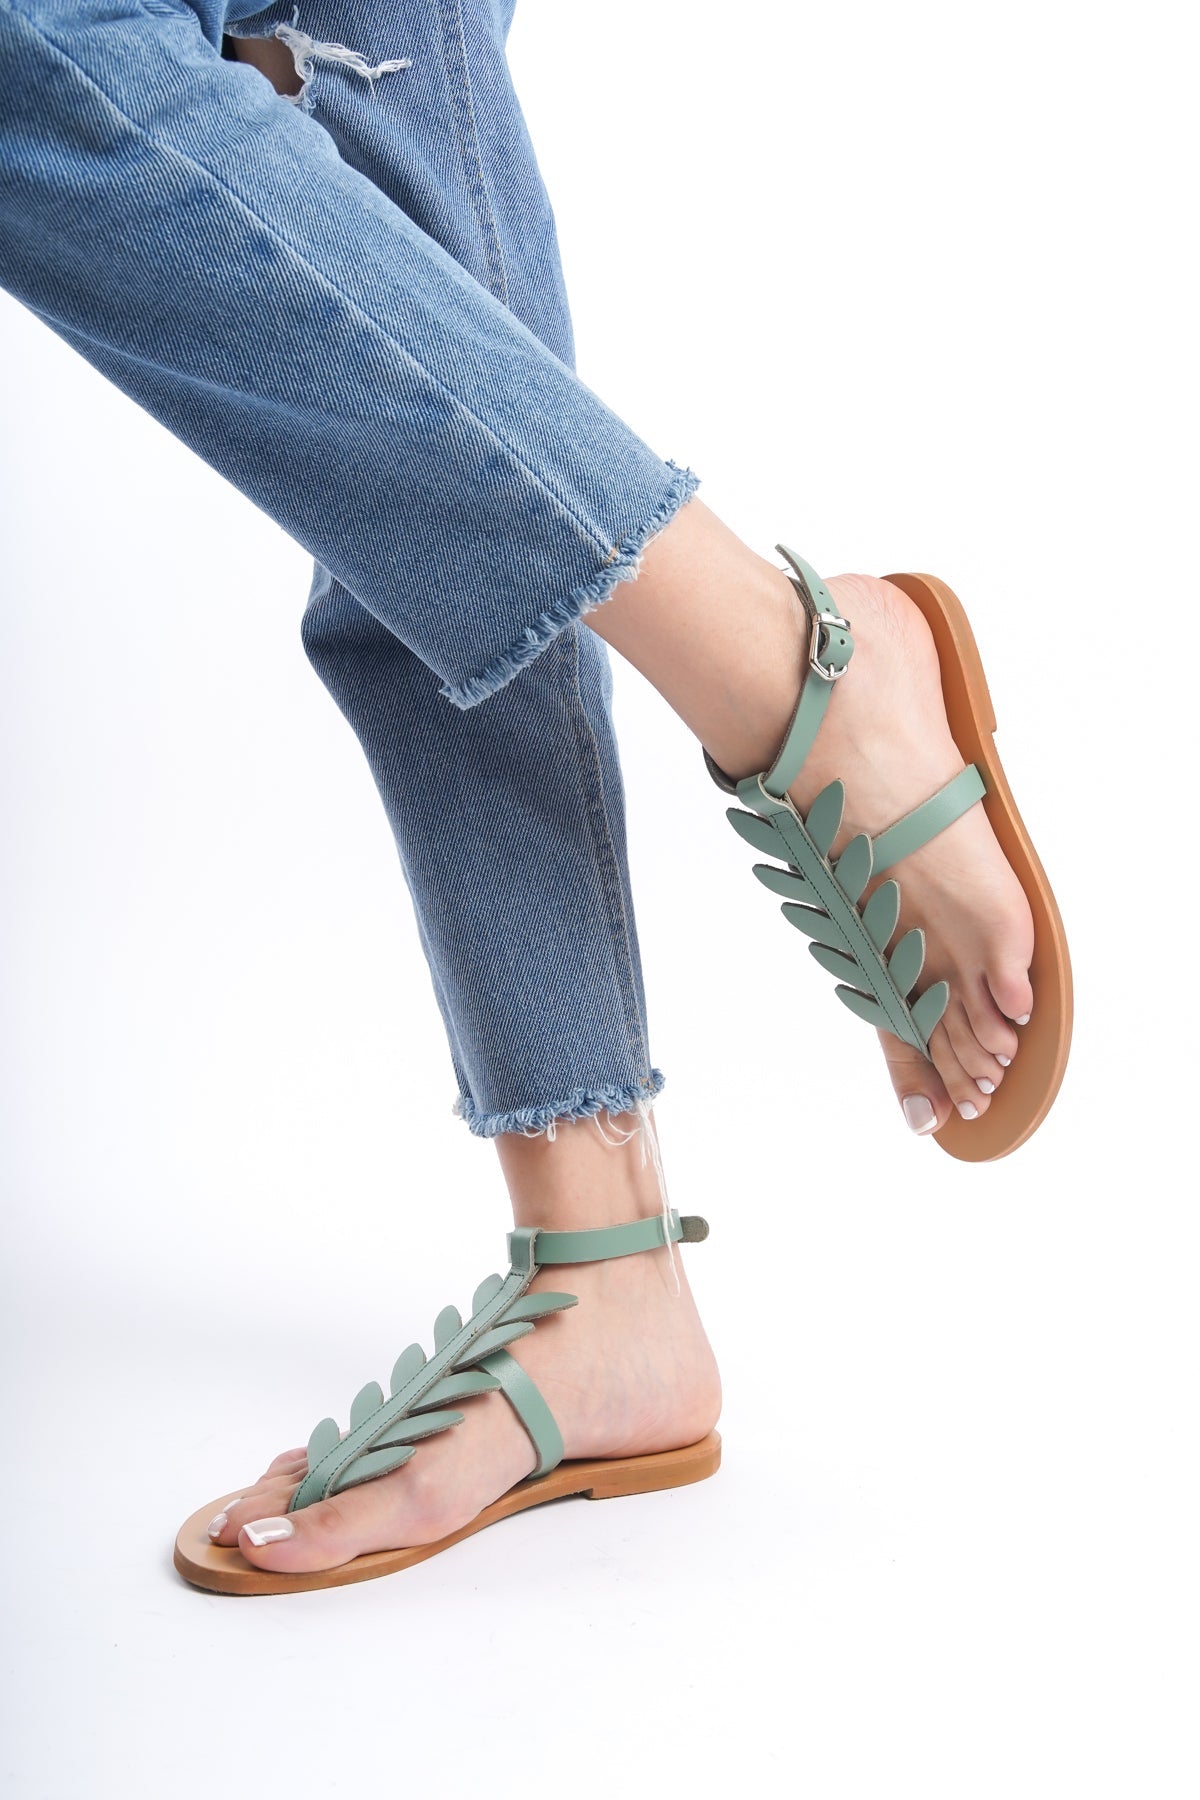 Leather Floral T-Strap Sandal for Women Turquoise